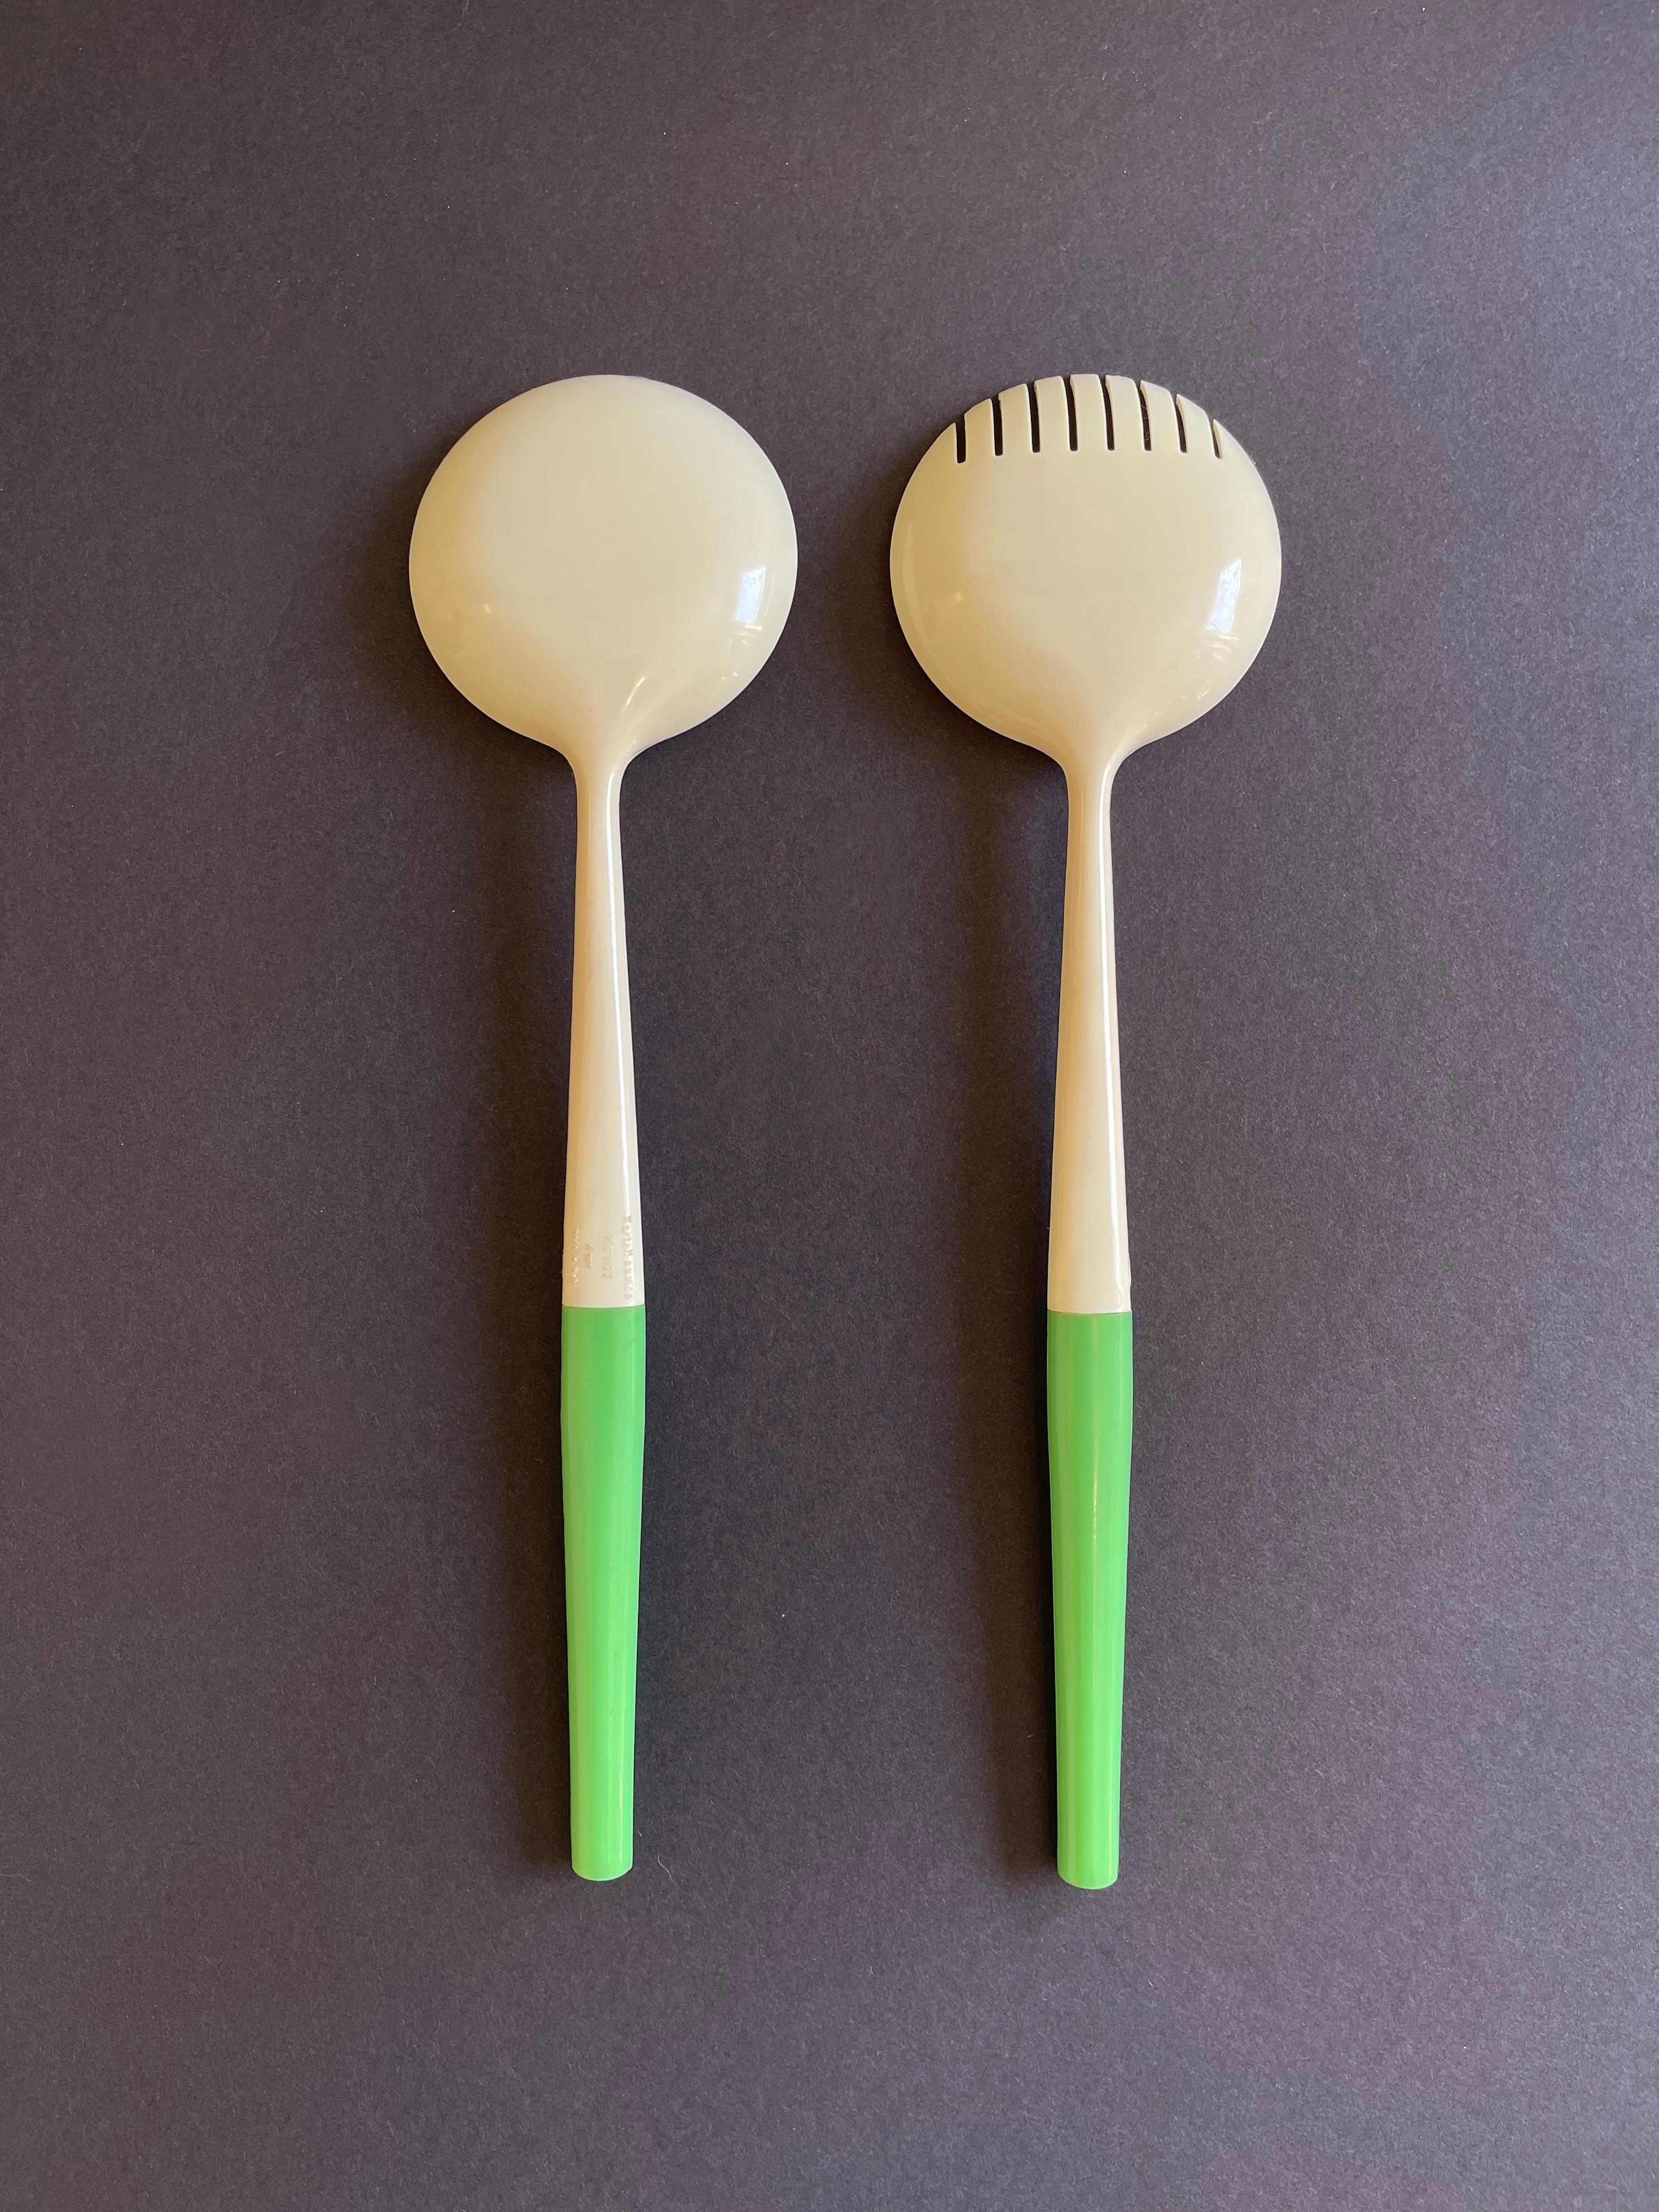 Mid-Century Modern Kartell Salad Spoon & Fork Casalinghi, 1958 Design, Gino Colombini, Milan, Italy For Sale